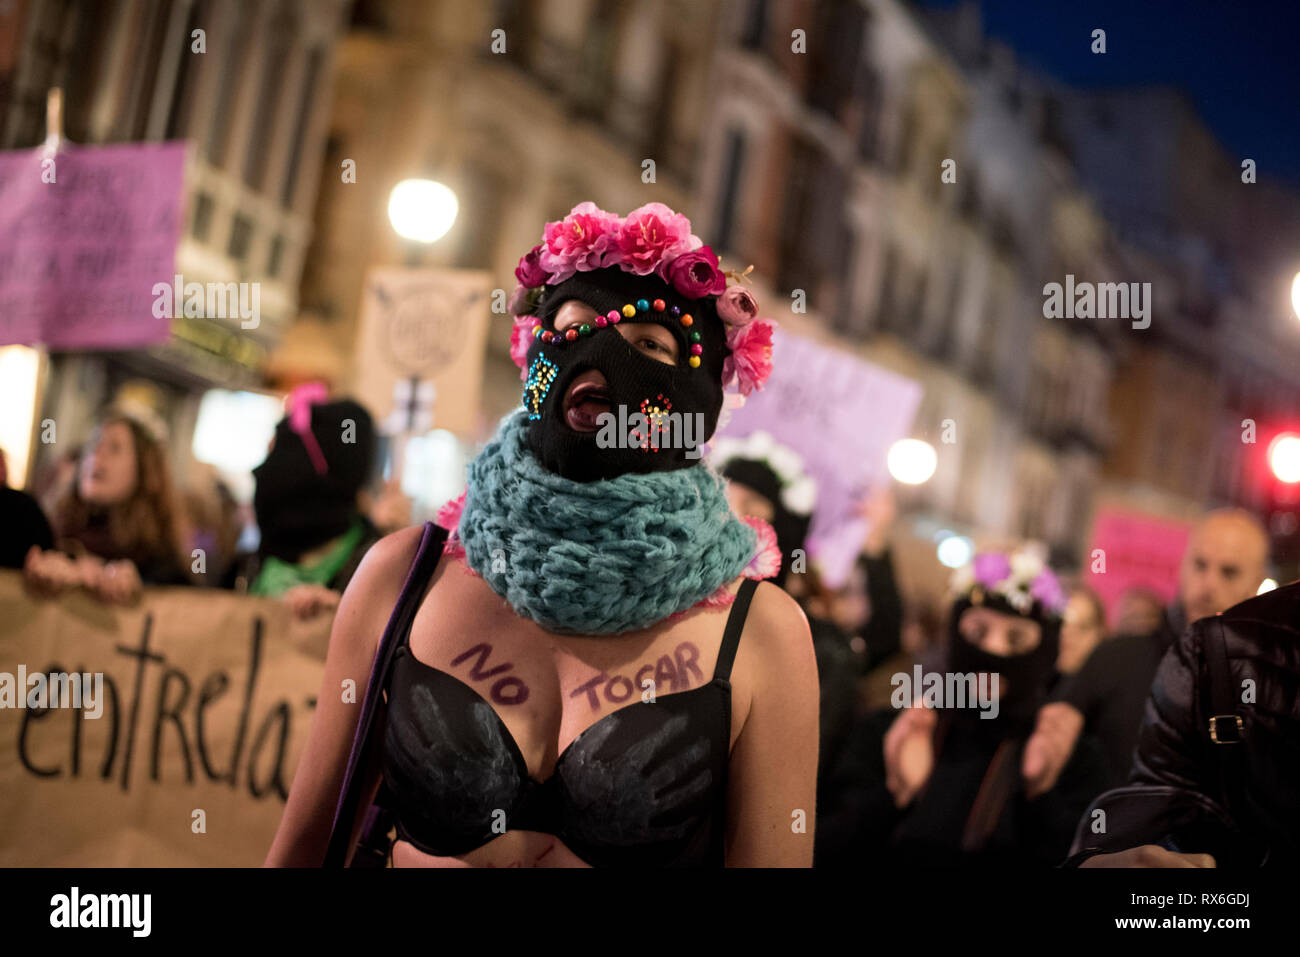 https://c8.alamy.com/comp/RX6GDJ/a-protester-with-her-face-masked-and-wearing-a-bra-is-seen-during-the-demonstration-of-the-international-womens-day-in-granada-60000-people-gathered-on-the-streets-of-granada-against-violence-against-women-and-to-demand-gender-equality-between-men-and-women-RX6GDJ.jpg